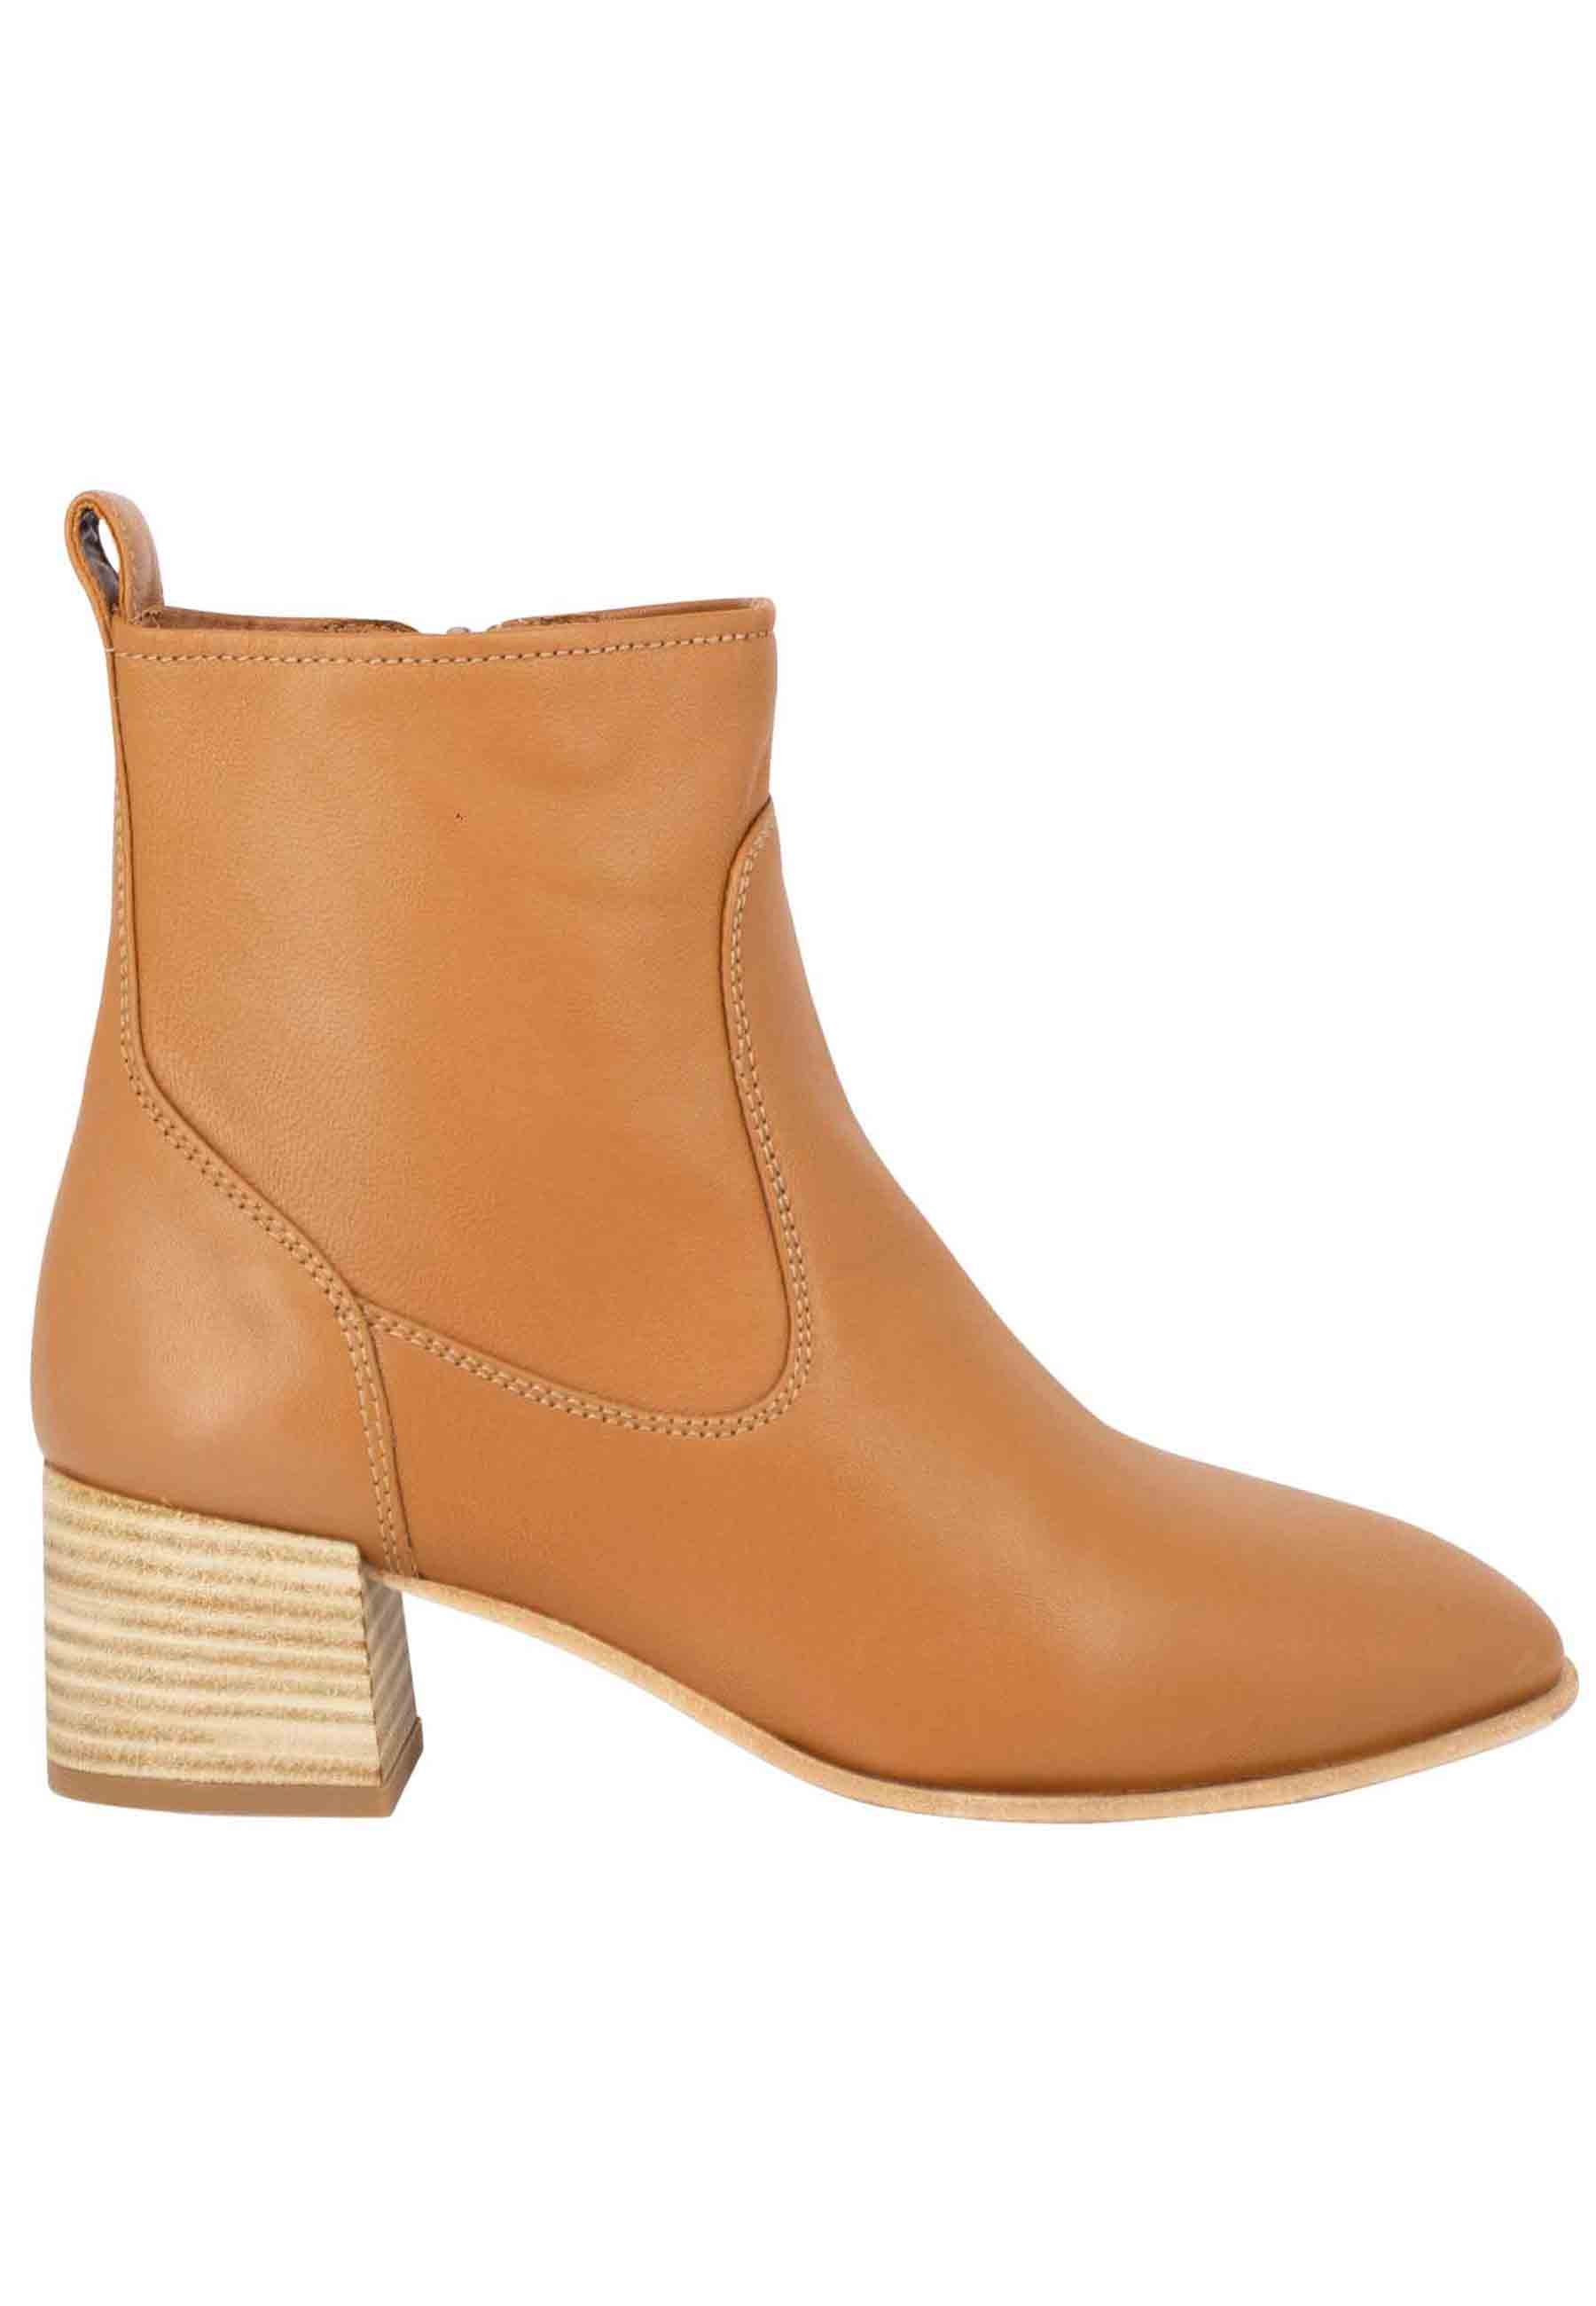 Women's unlined tan leather ankle boots with natural leather heel